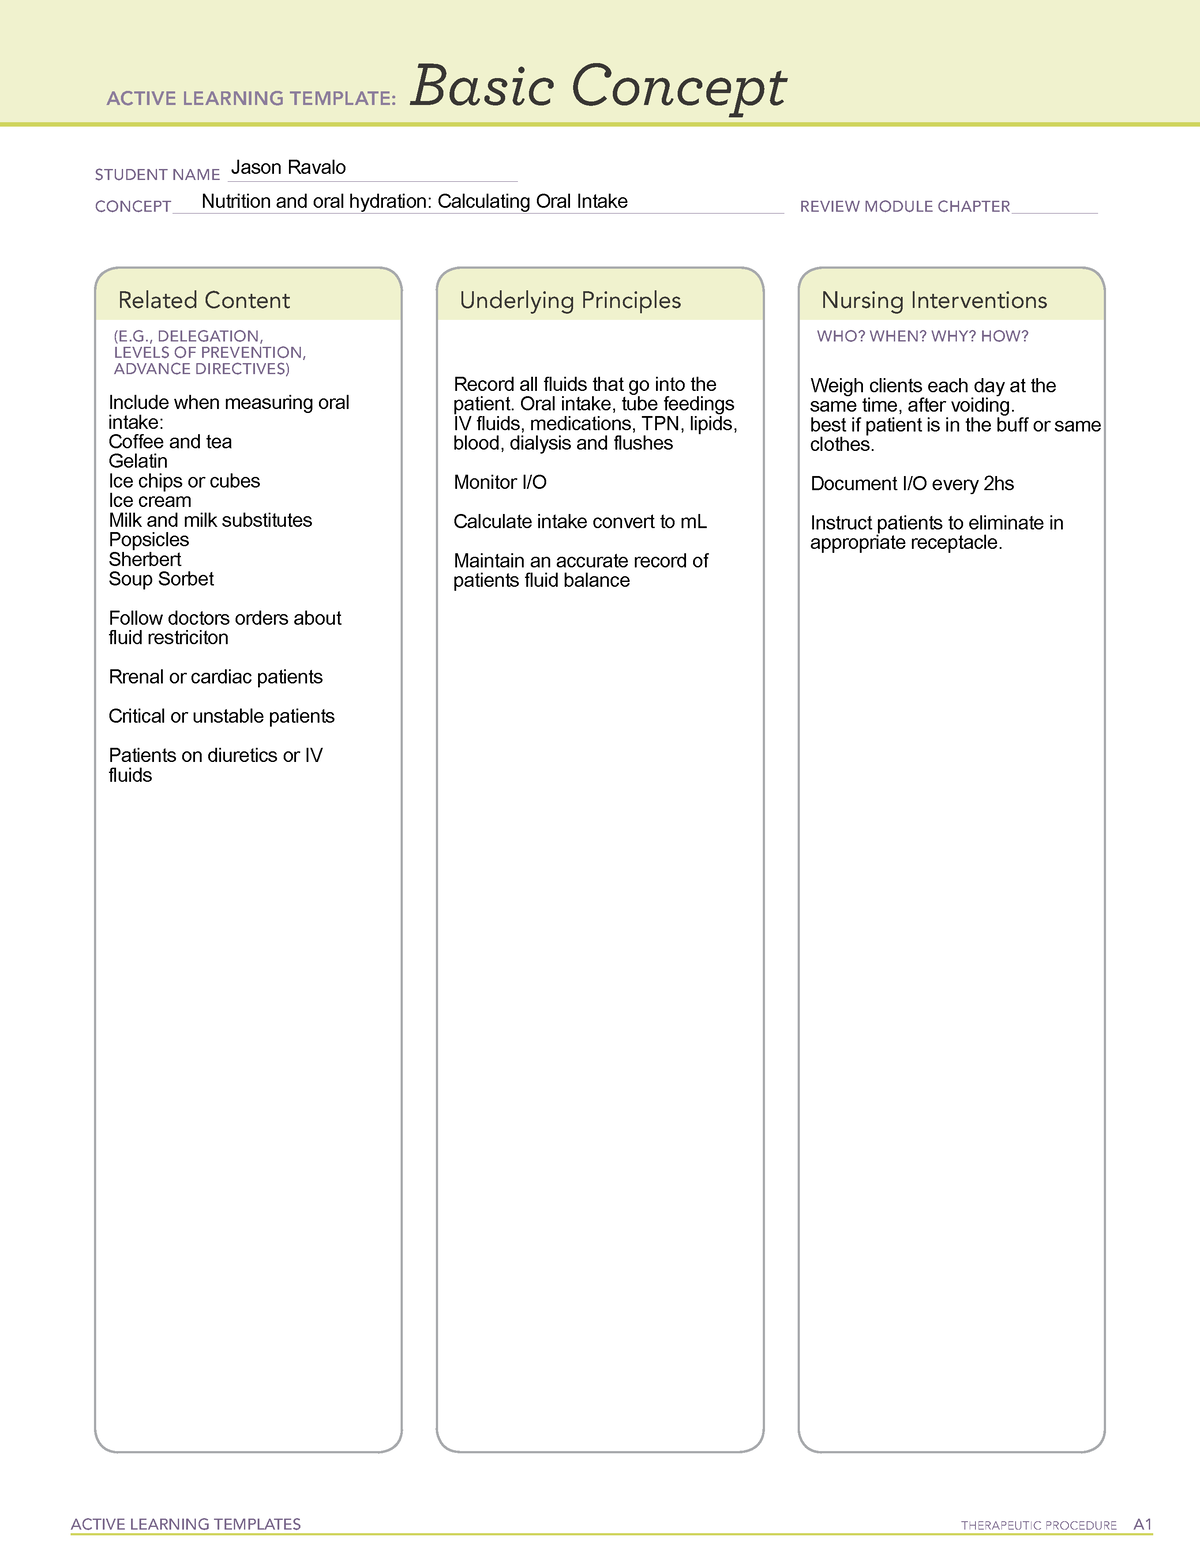 active-learning-template-basic-concept-intake-and-output-active-learning-templates